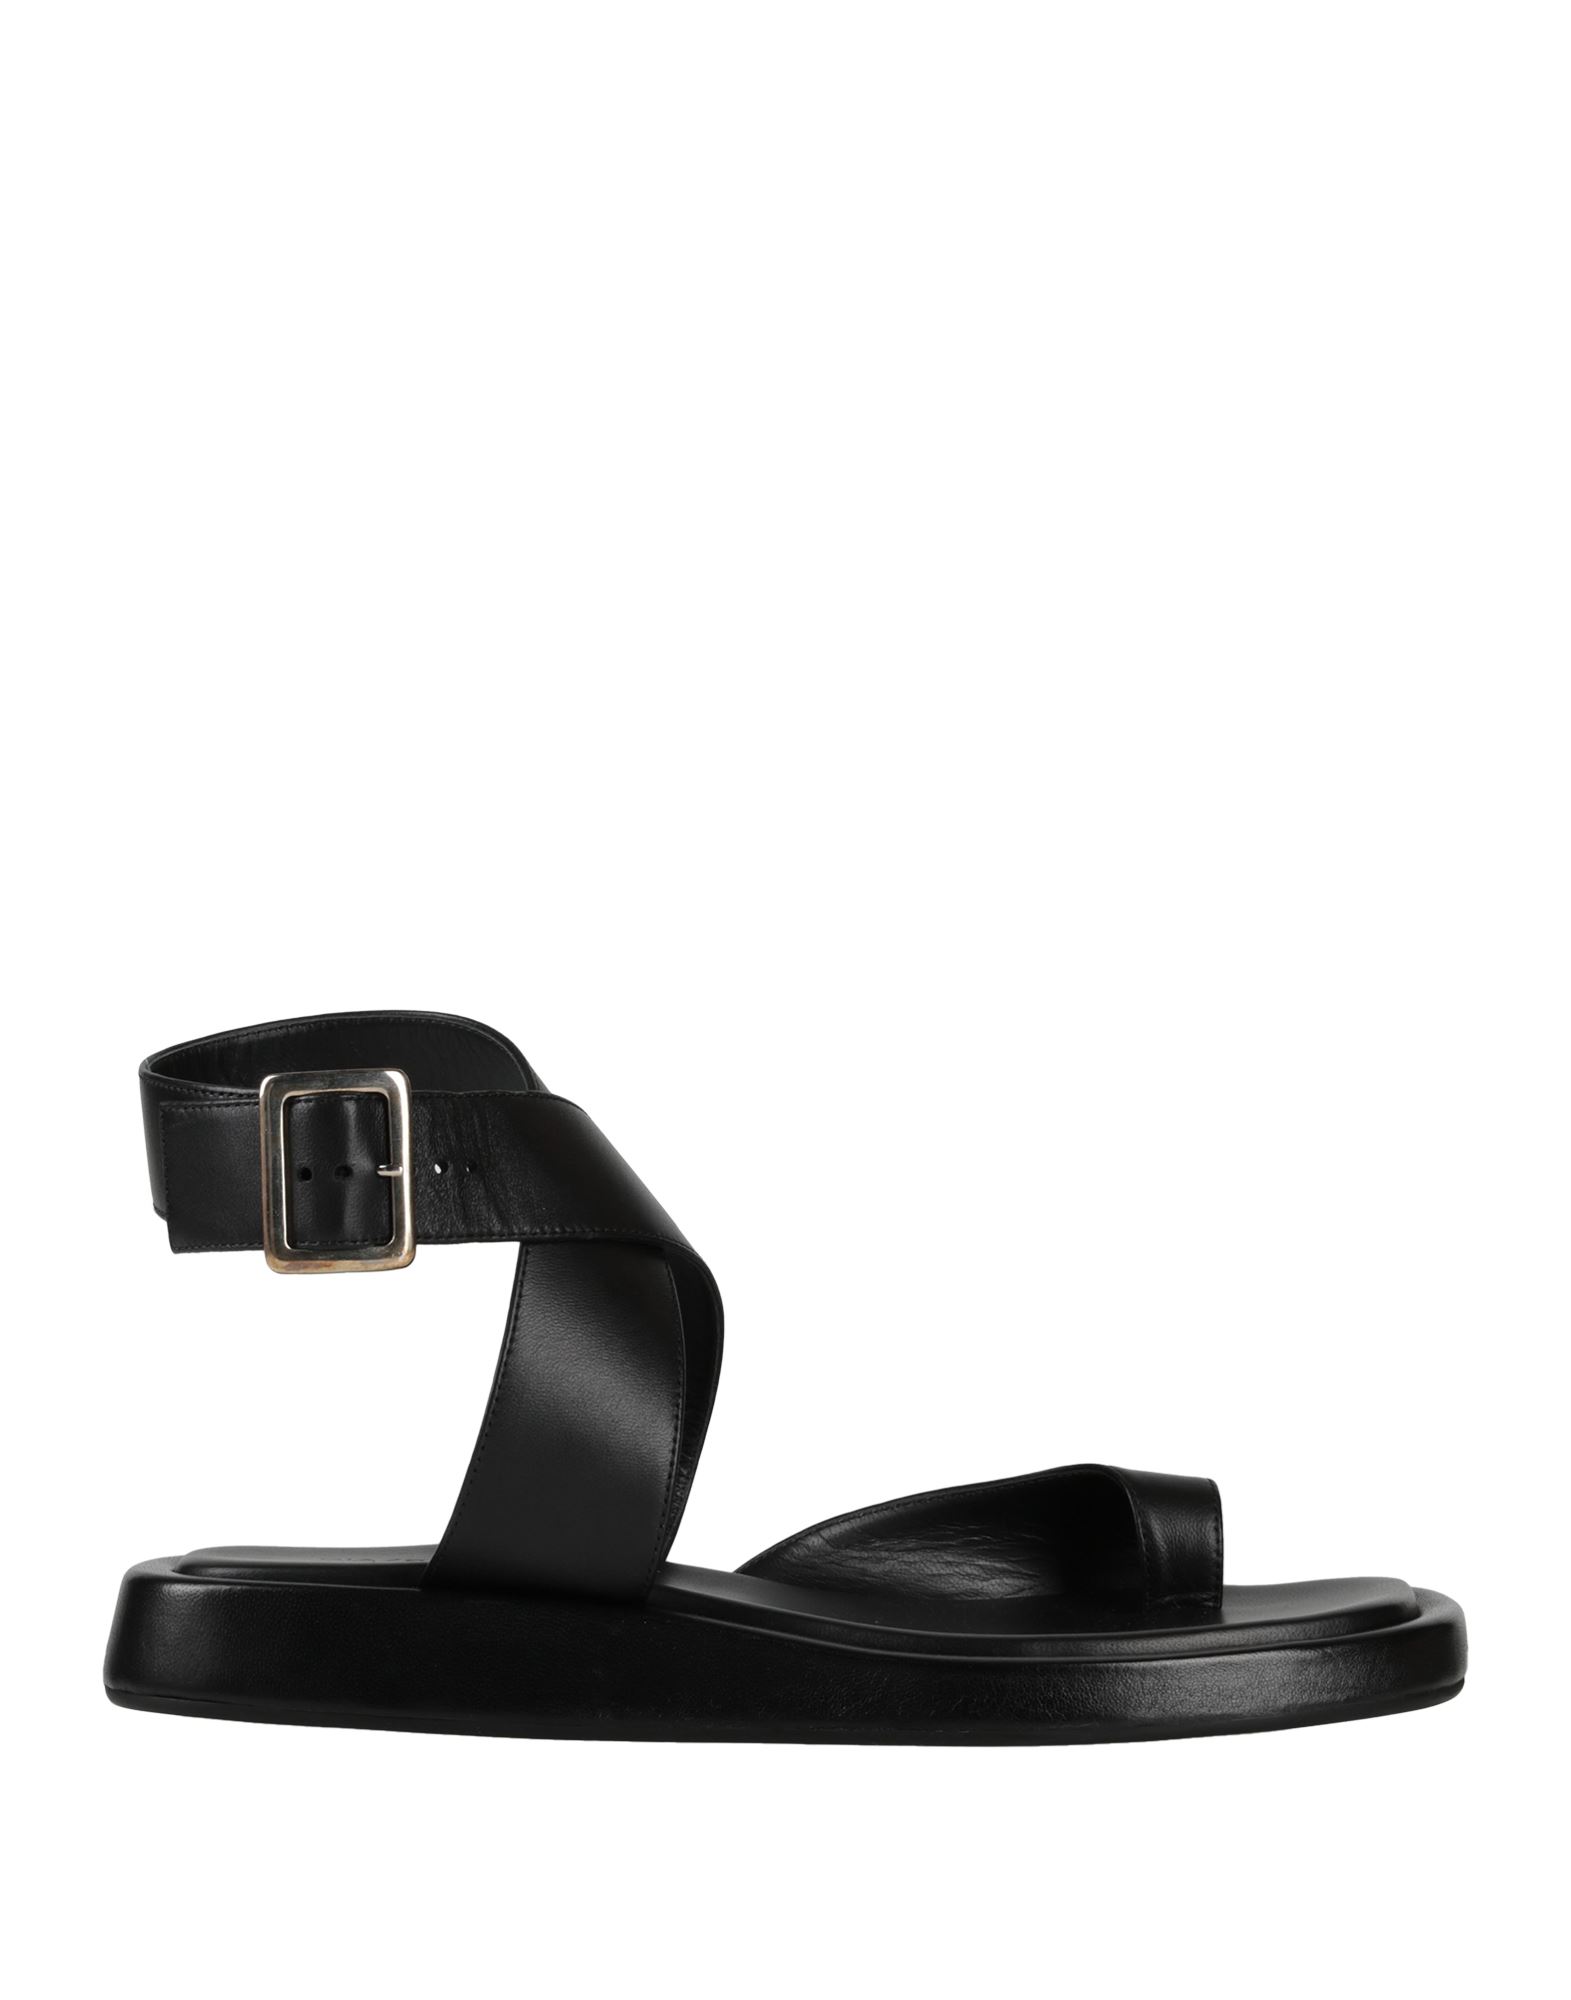 GIA RHW GIA / RHW WOMAN TOE STRAP SANDALS BLACK SIZE 9 SOFT LEATHER